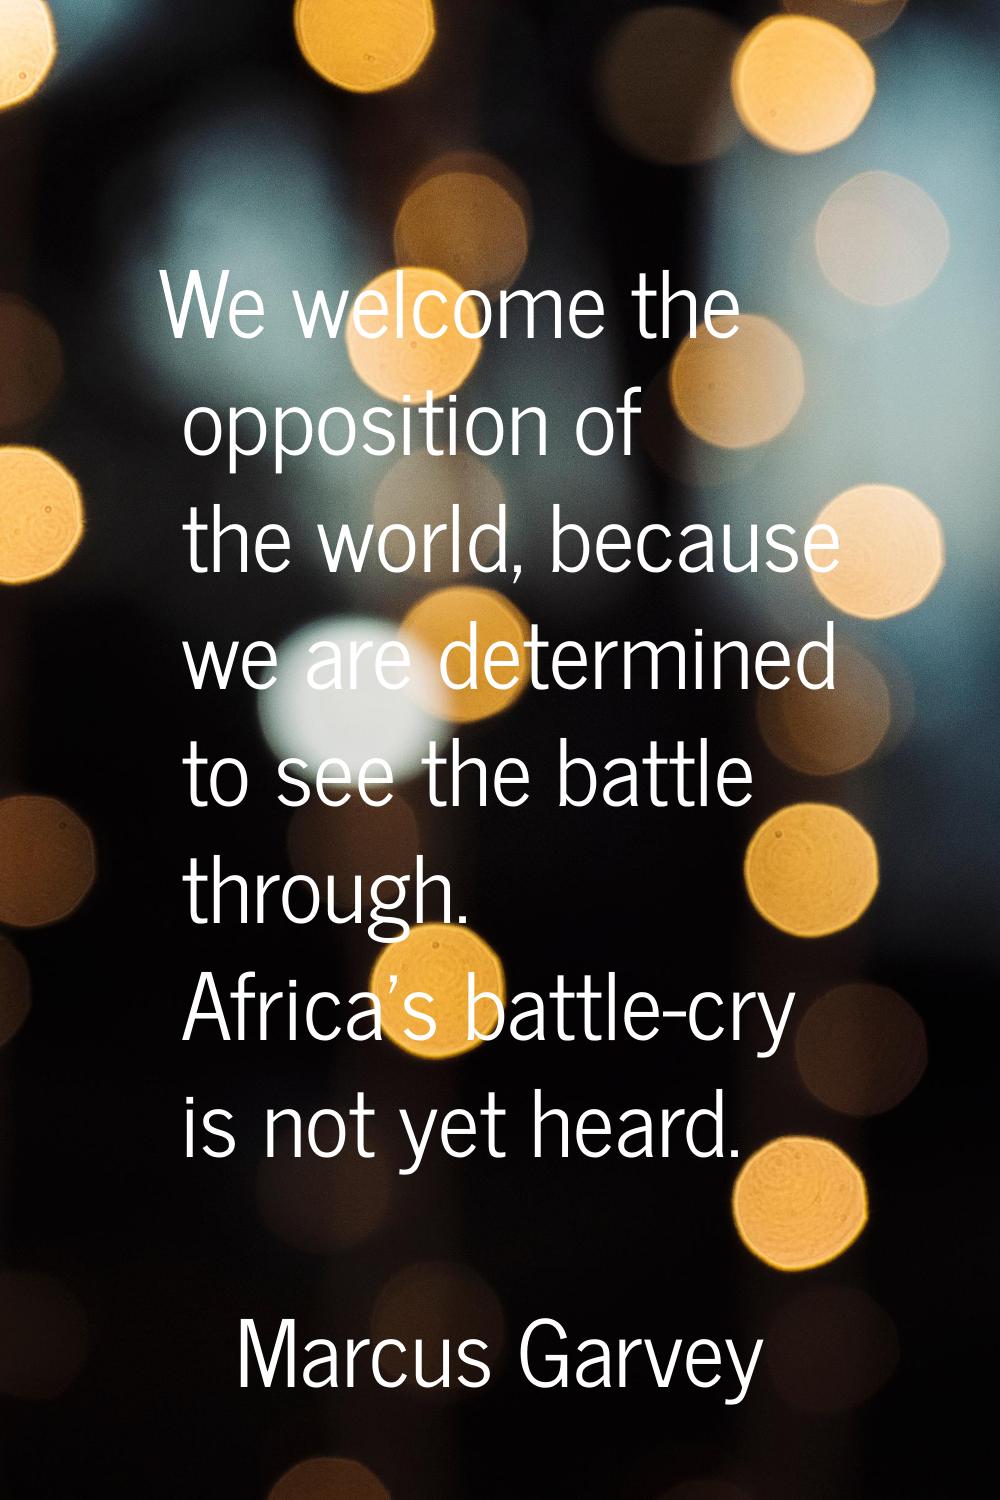 We welcome the opposition of the world, because we are determined to see the battle through. Africa